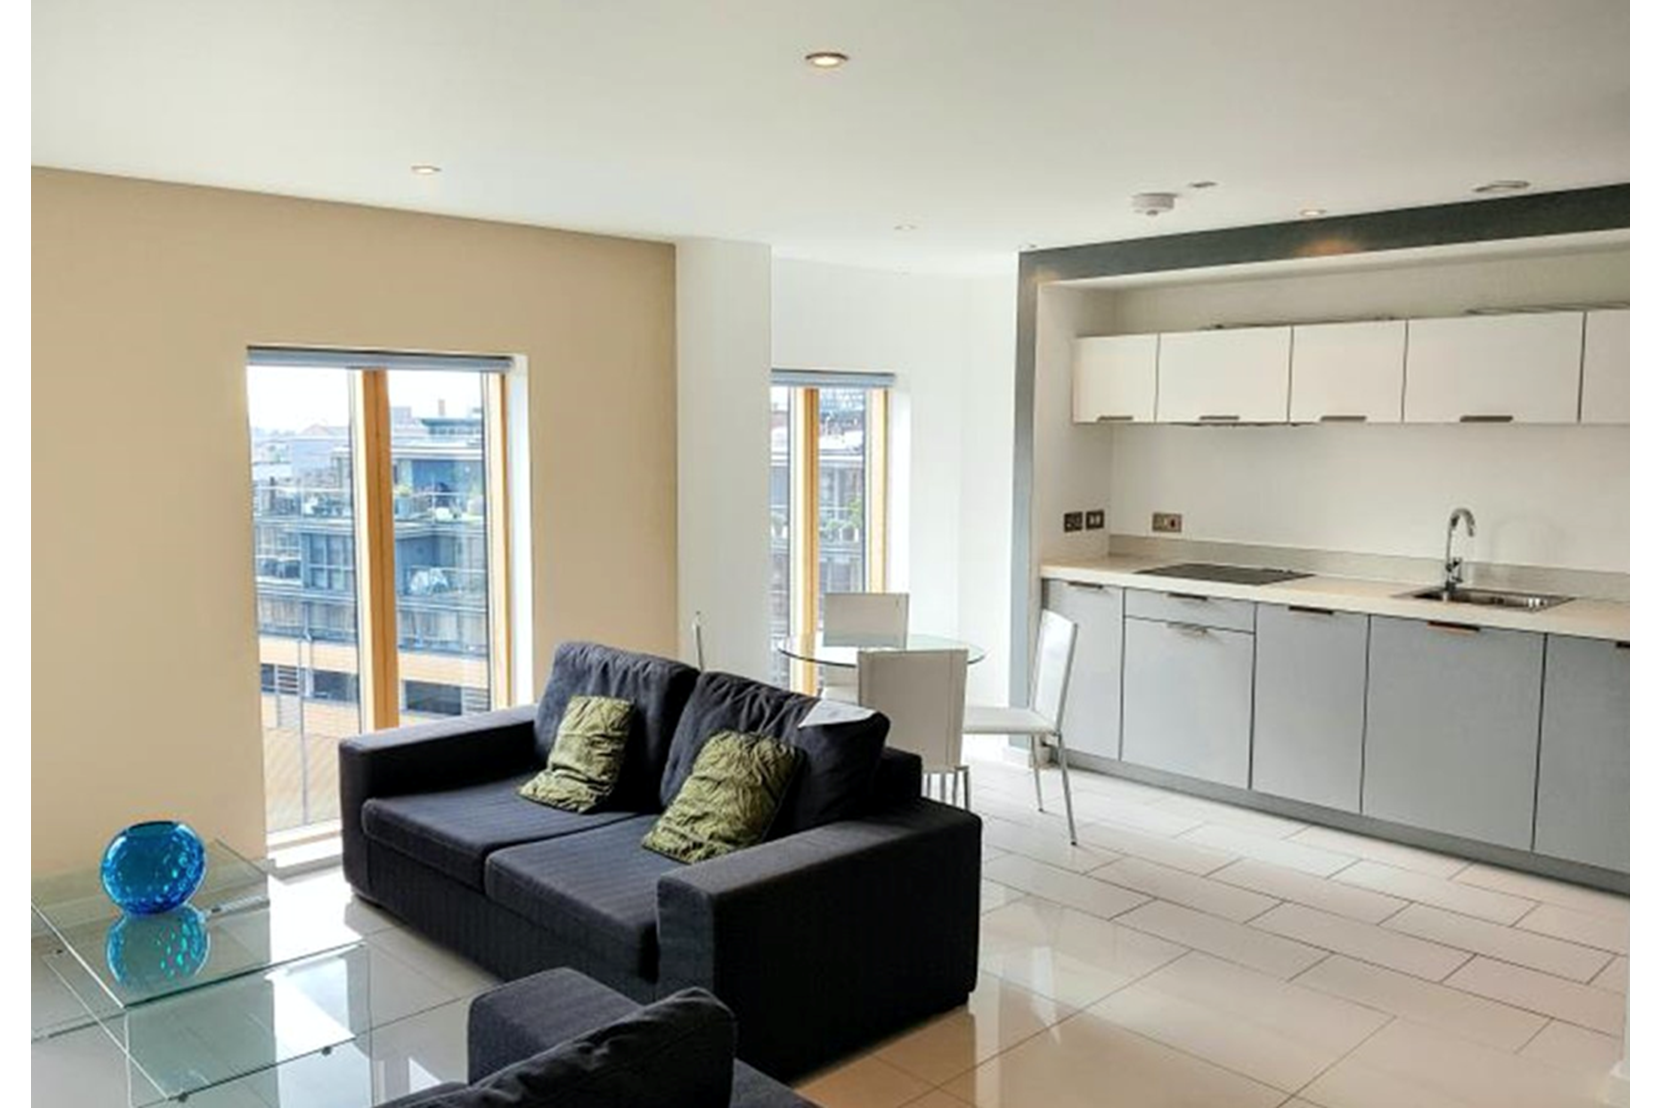 Apartments to Rent by Northern Group at Ice Plant, Manchester, M4, living kitchen area